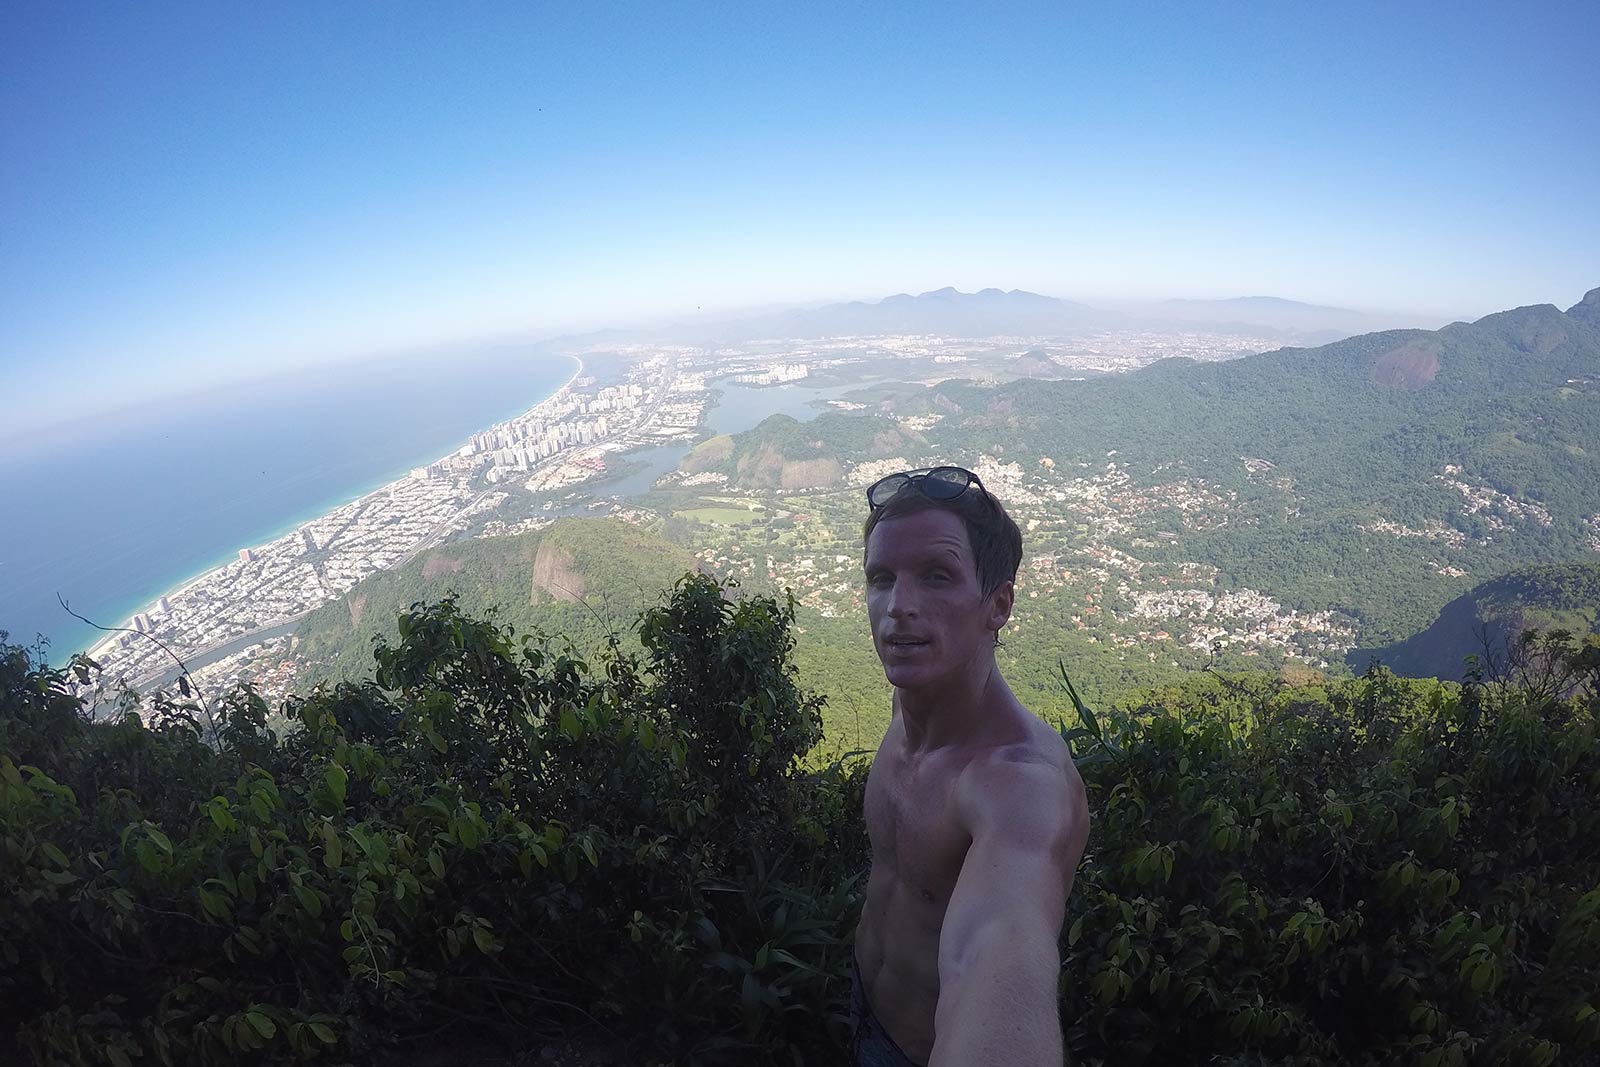 David Simpson sweating on top of the mountain in Gavea, Brazil. Climbing the wrong mountain, the best mistake I've made